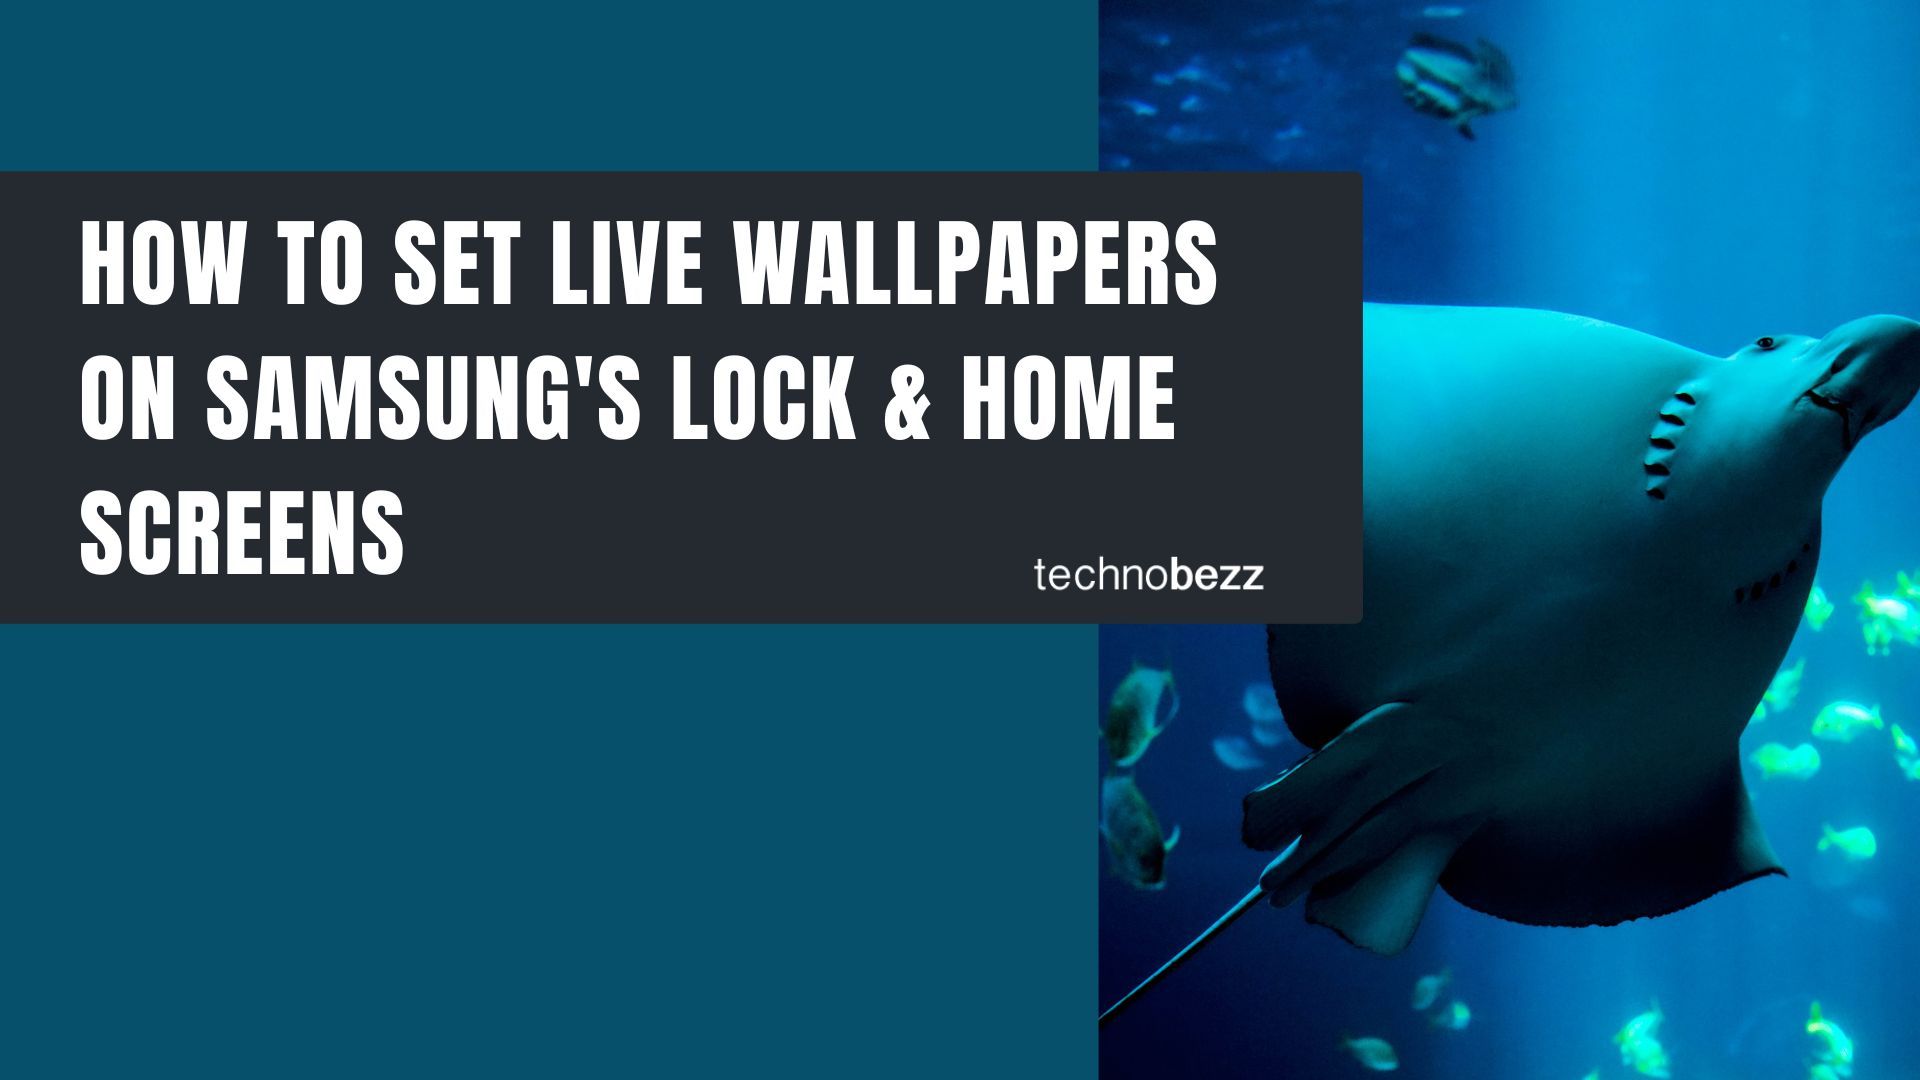 How To Set Live Wallpapers On Samsung's Lock & Home Screens - Technobezz